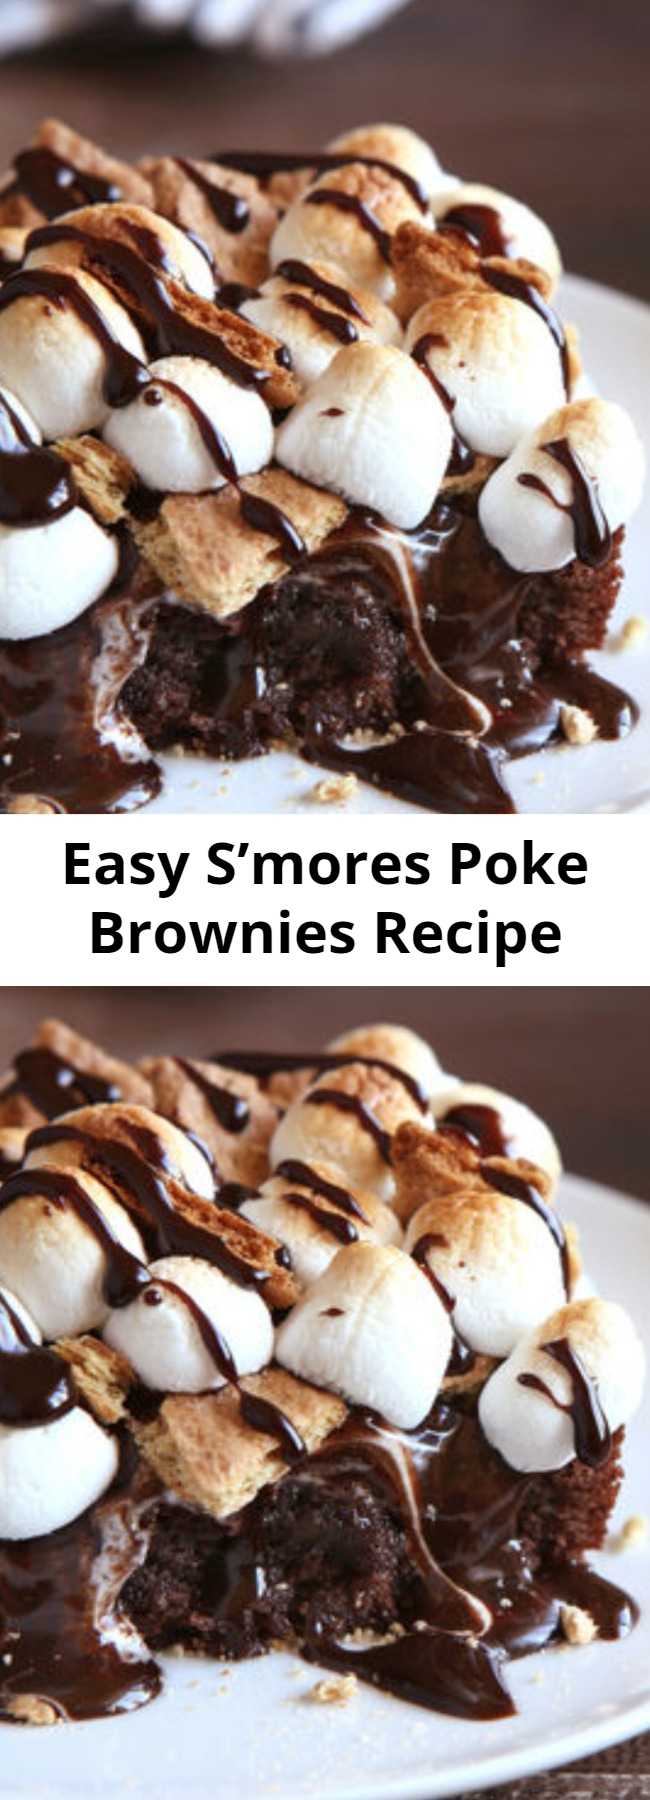 Easy S’mores Poke Brownies Recipe - Hey, S’ mores fans, your dream dessert is here! These incredible brownies are filled with marshmallow creme and topped with hot fudge, graham crackers and toasted marshmallows.